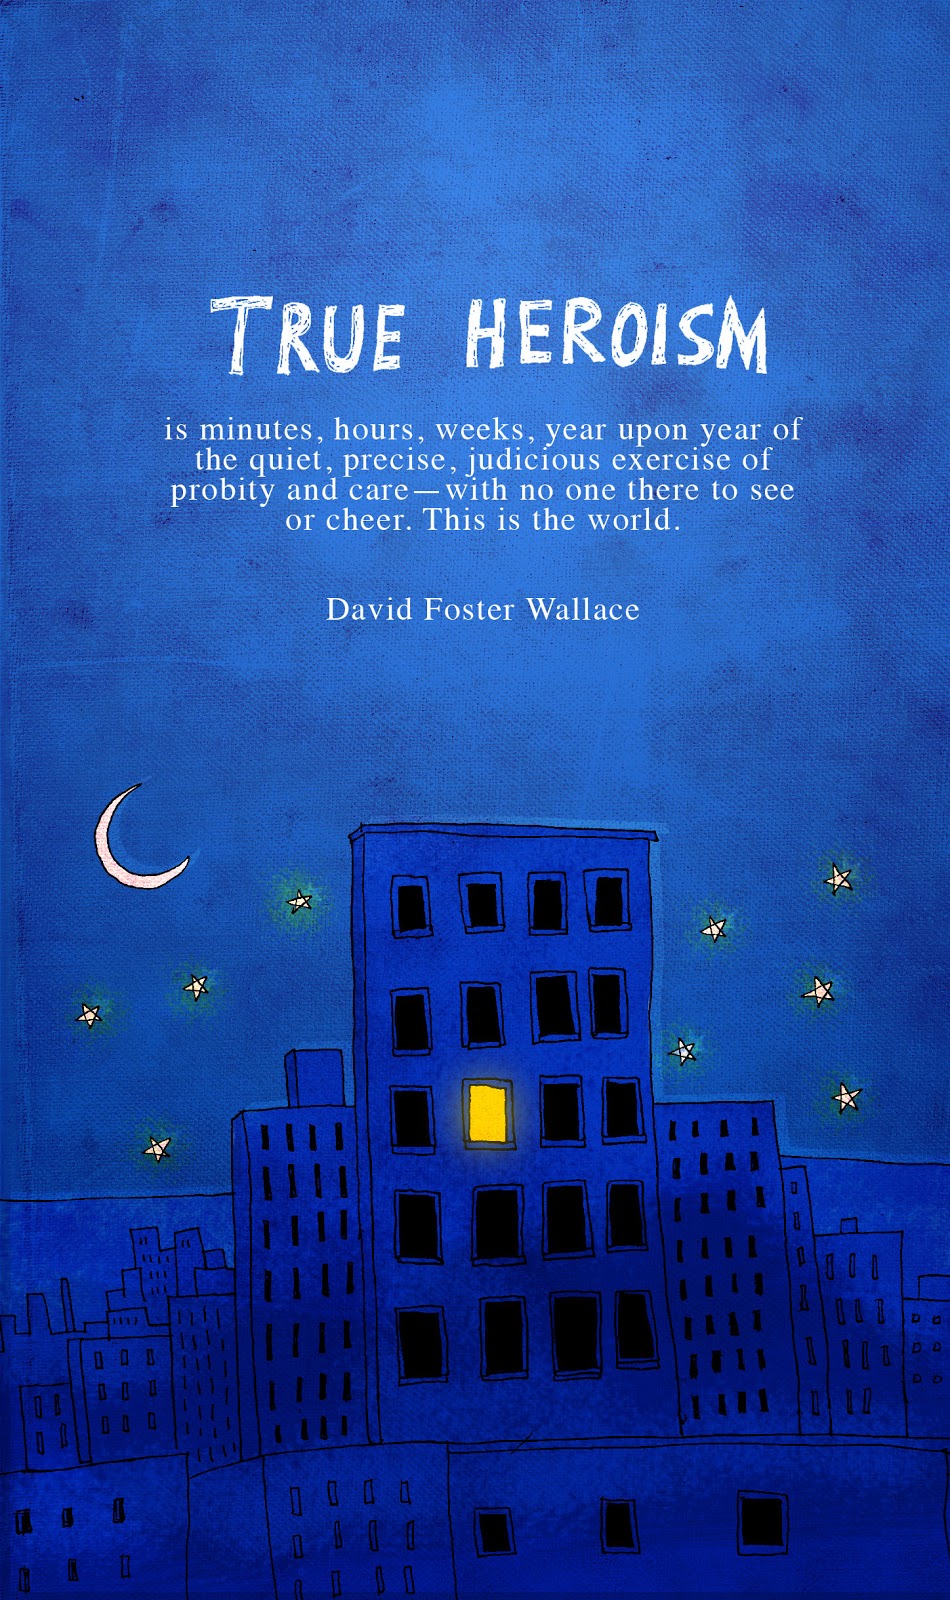 True heroism is minutes, hours, weeks, year upon year of the quiet, precise, judicious exercise of probity and care—with no one there... David Foster Wallace